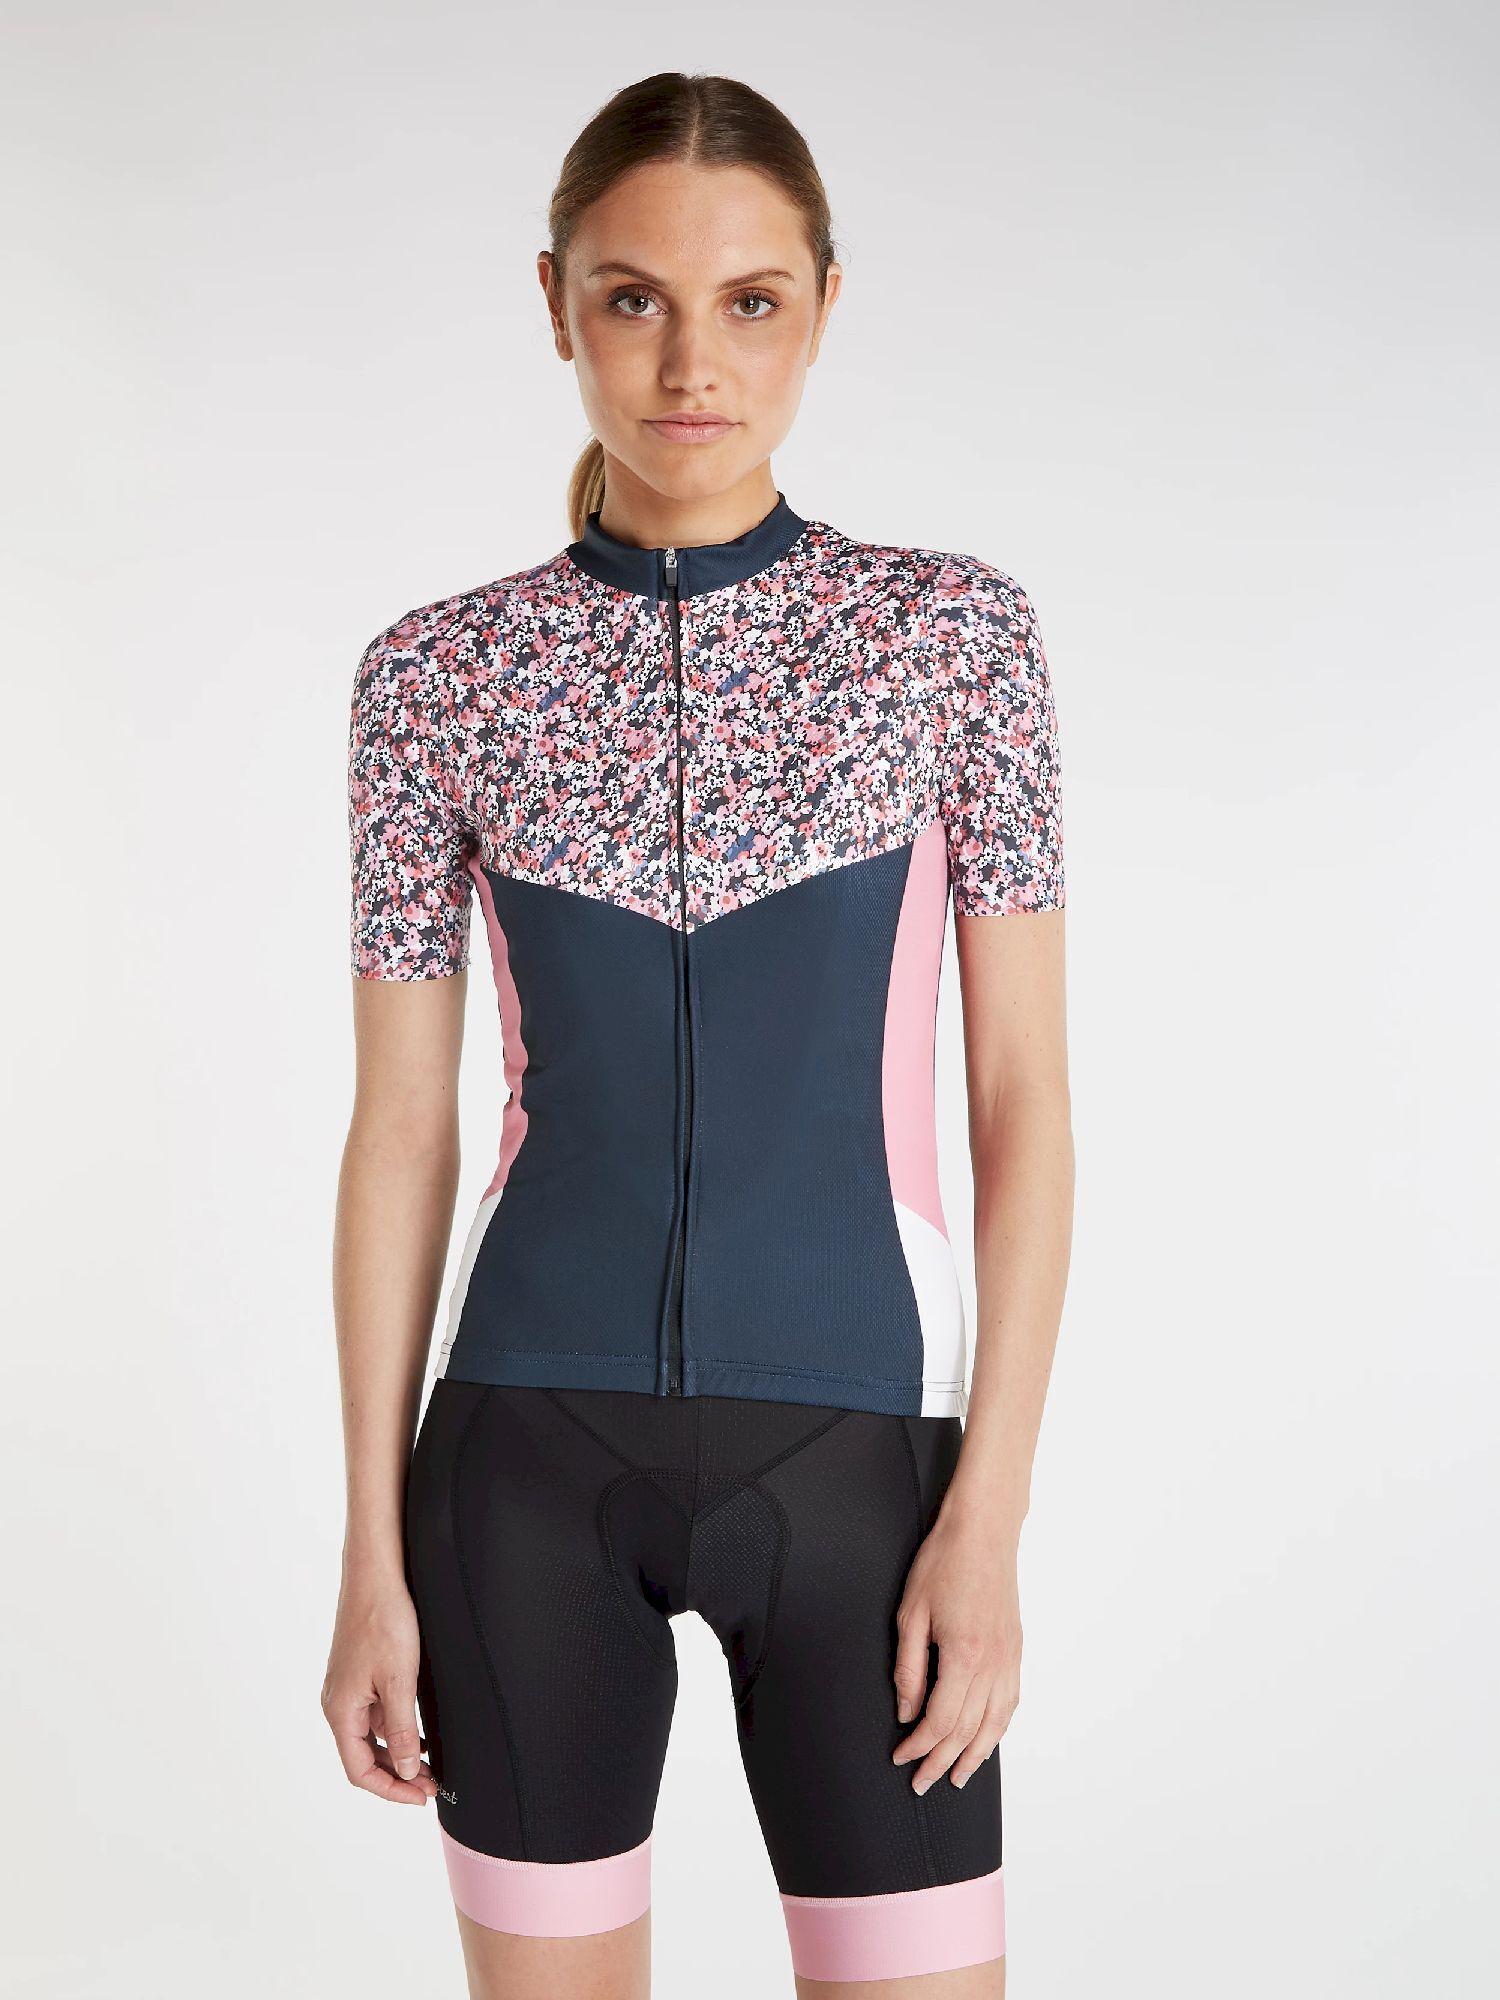 Protest Prtcacao - Cycling jersey - Women's | Hardloop